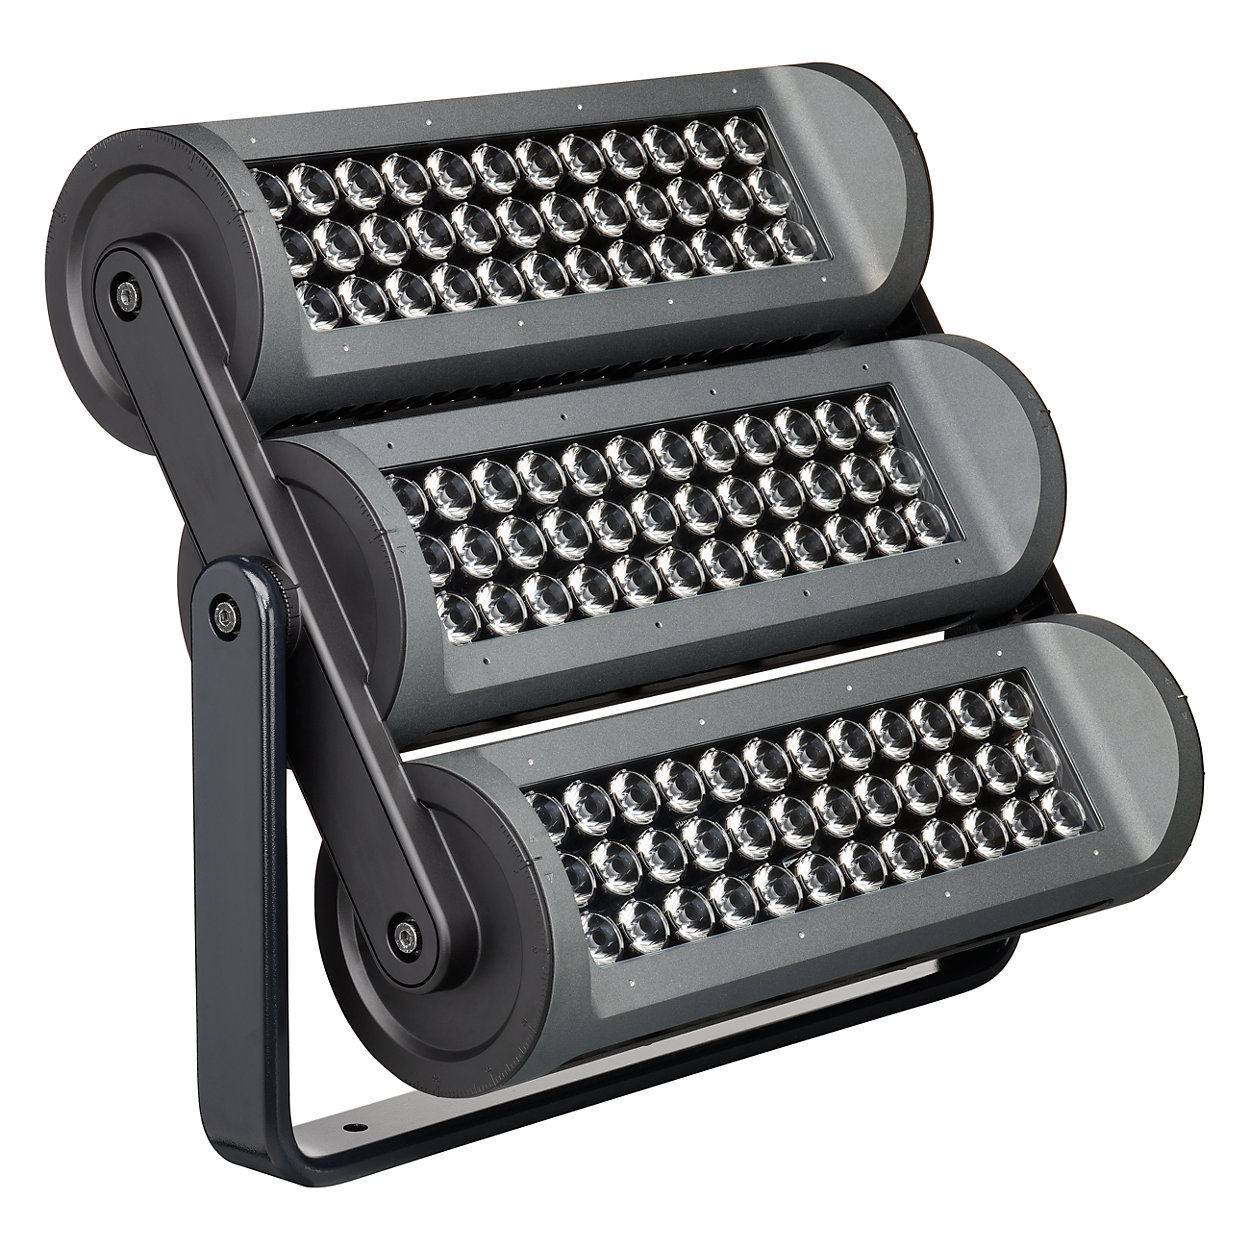 High-performance long-throw exterior LED luminaire with IntelliHue technology